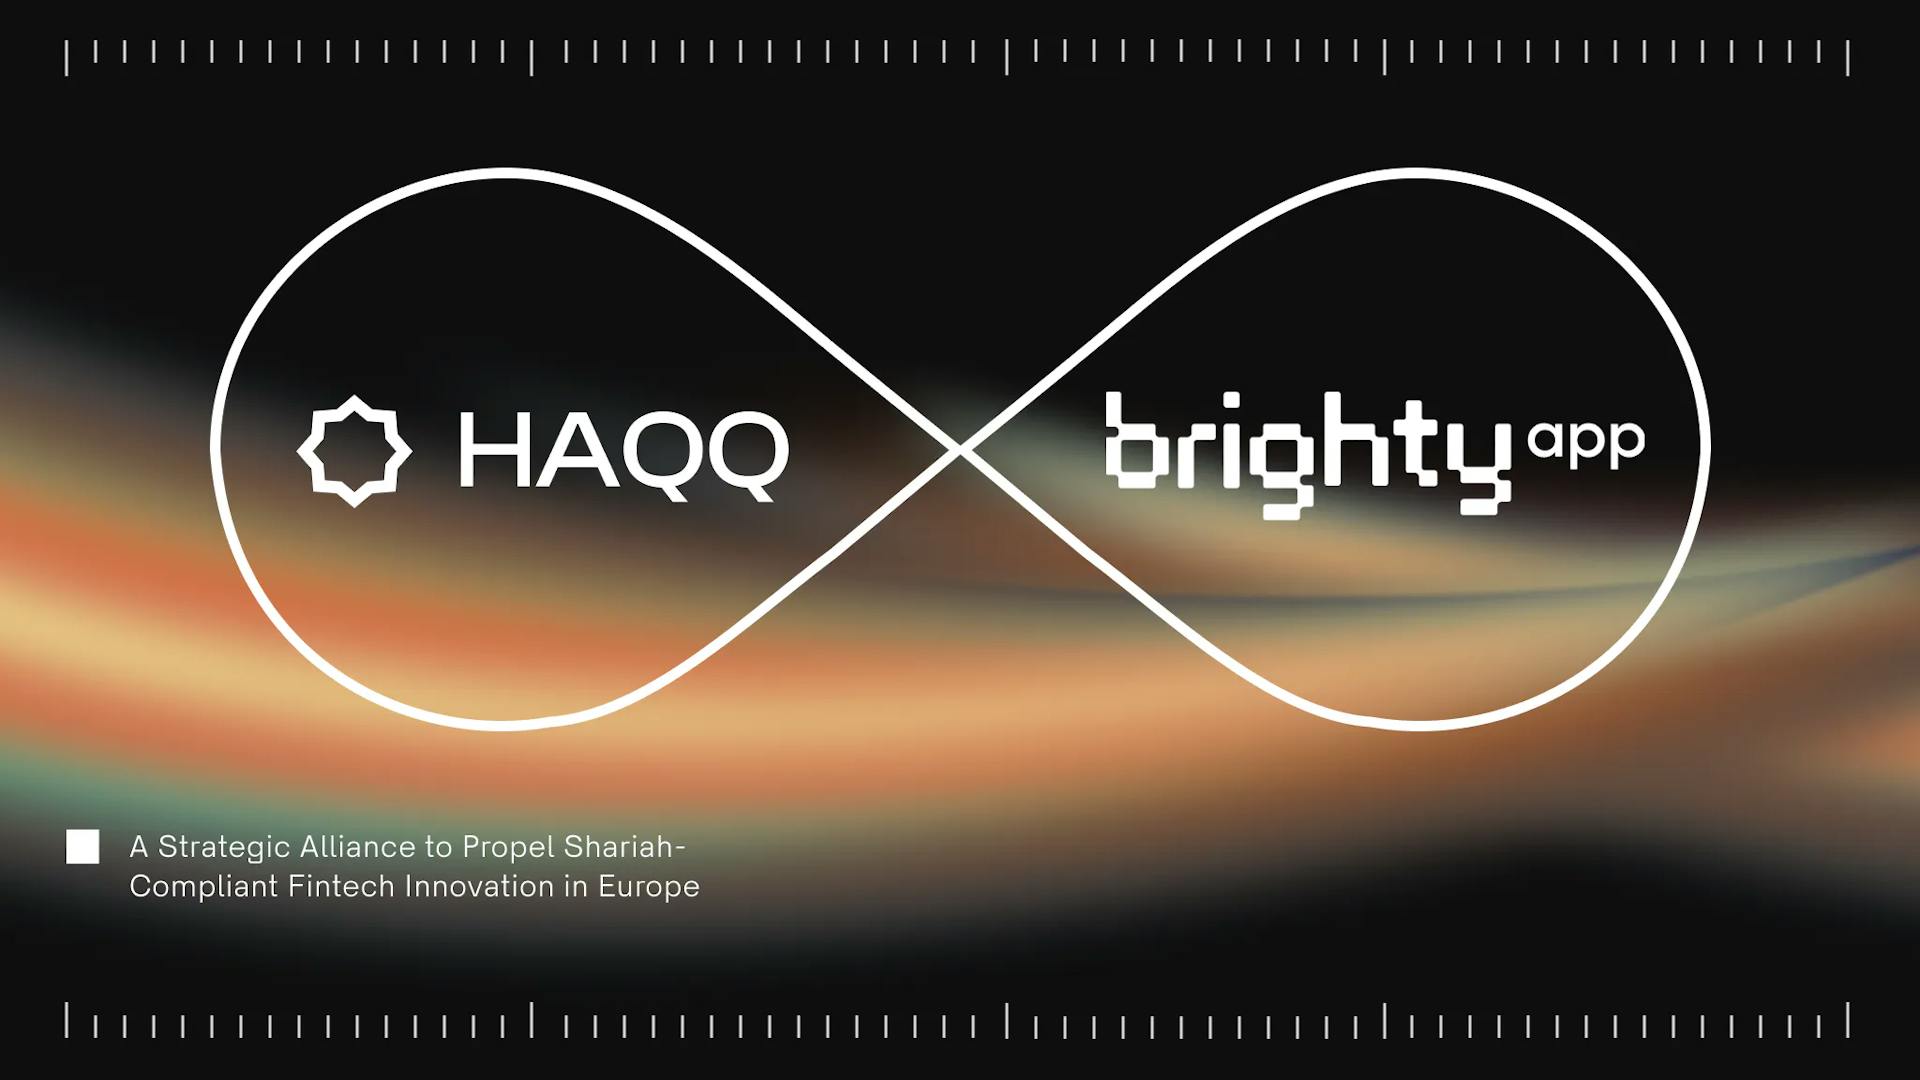 HAQQ and Brighty App, A strategic alliance to propel shariah-compliant fintech innovation in Europe